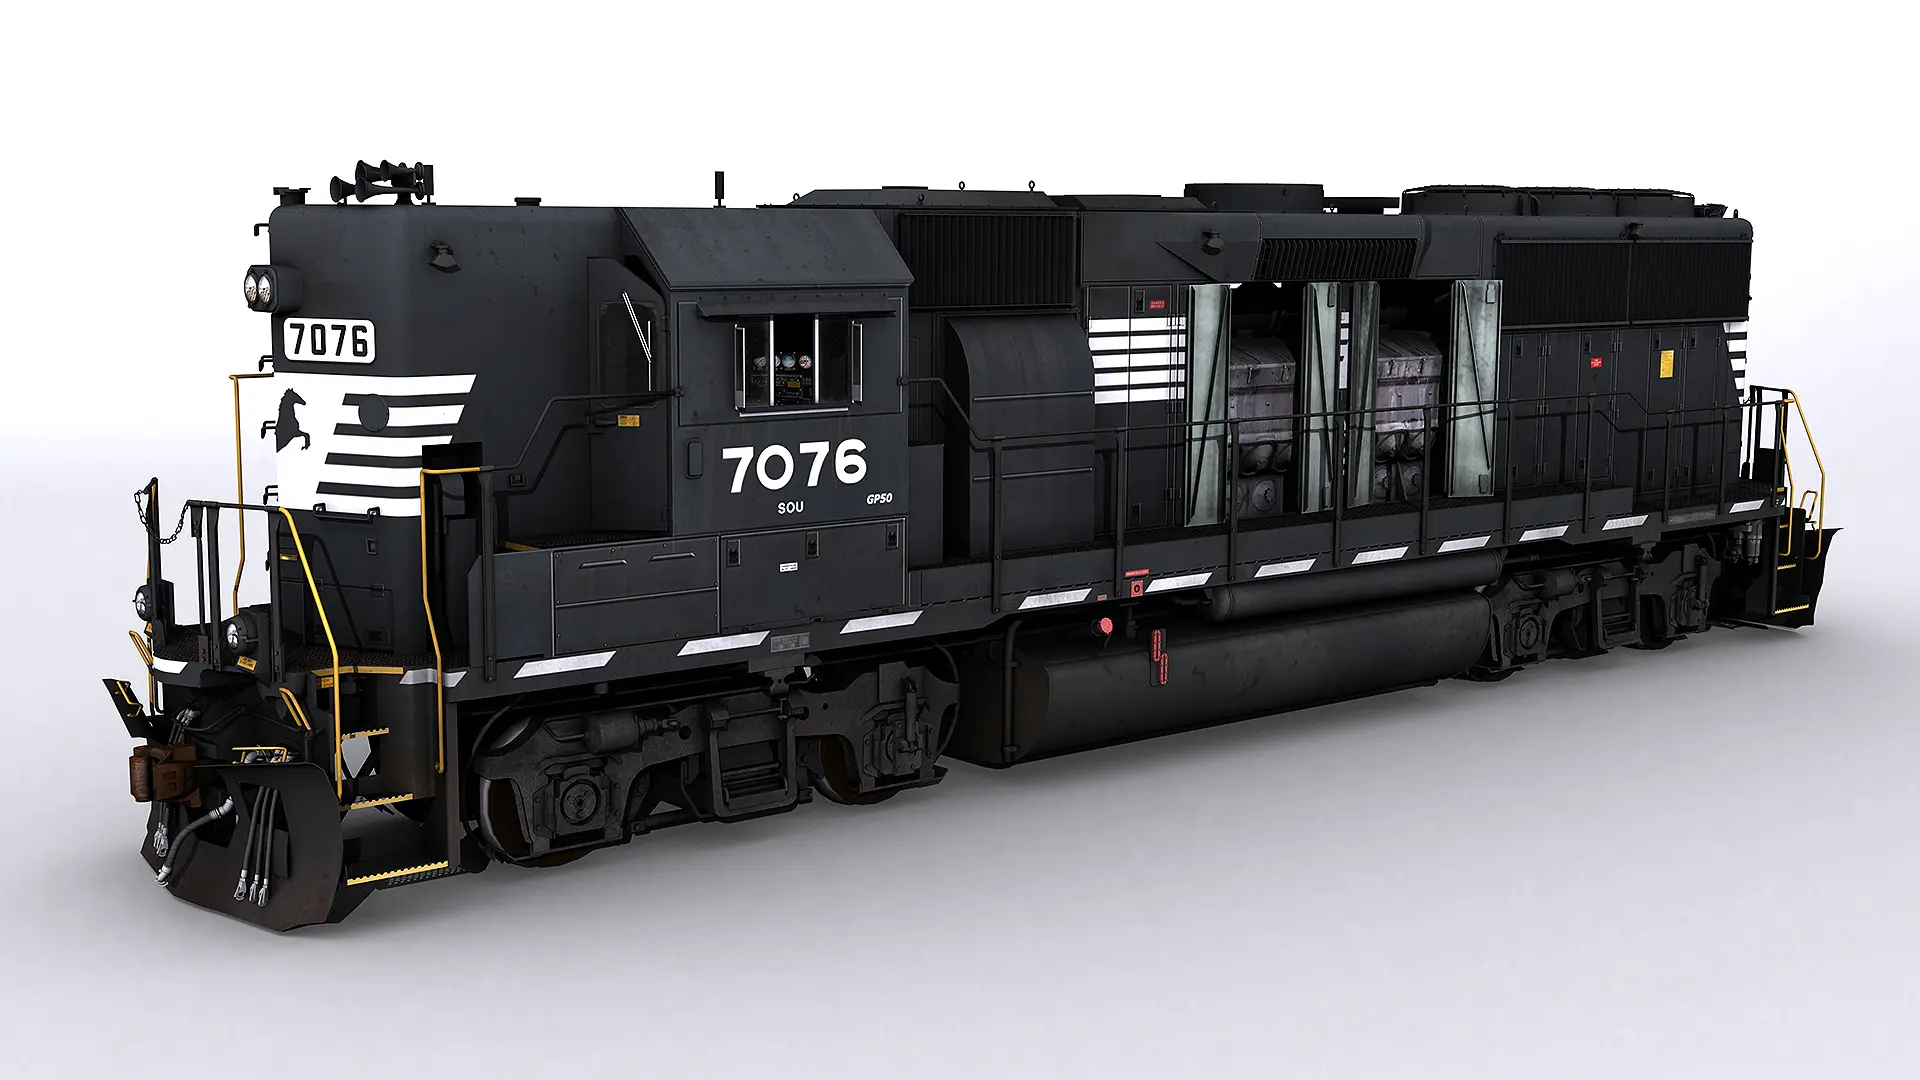 The RRMODS product, a black powerful rail engine